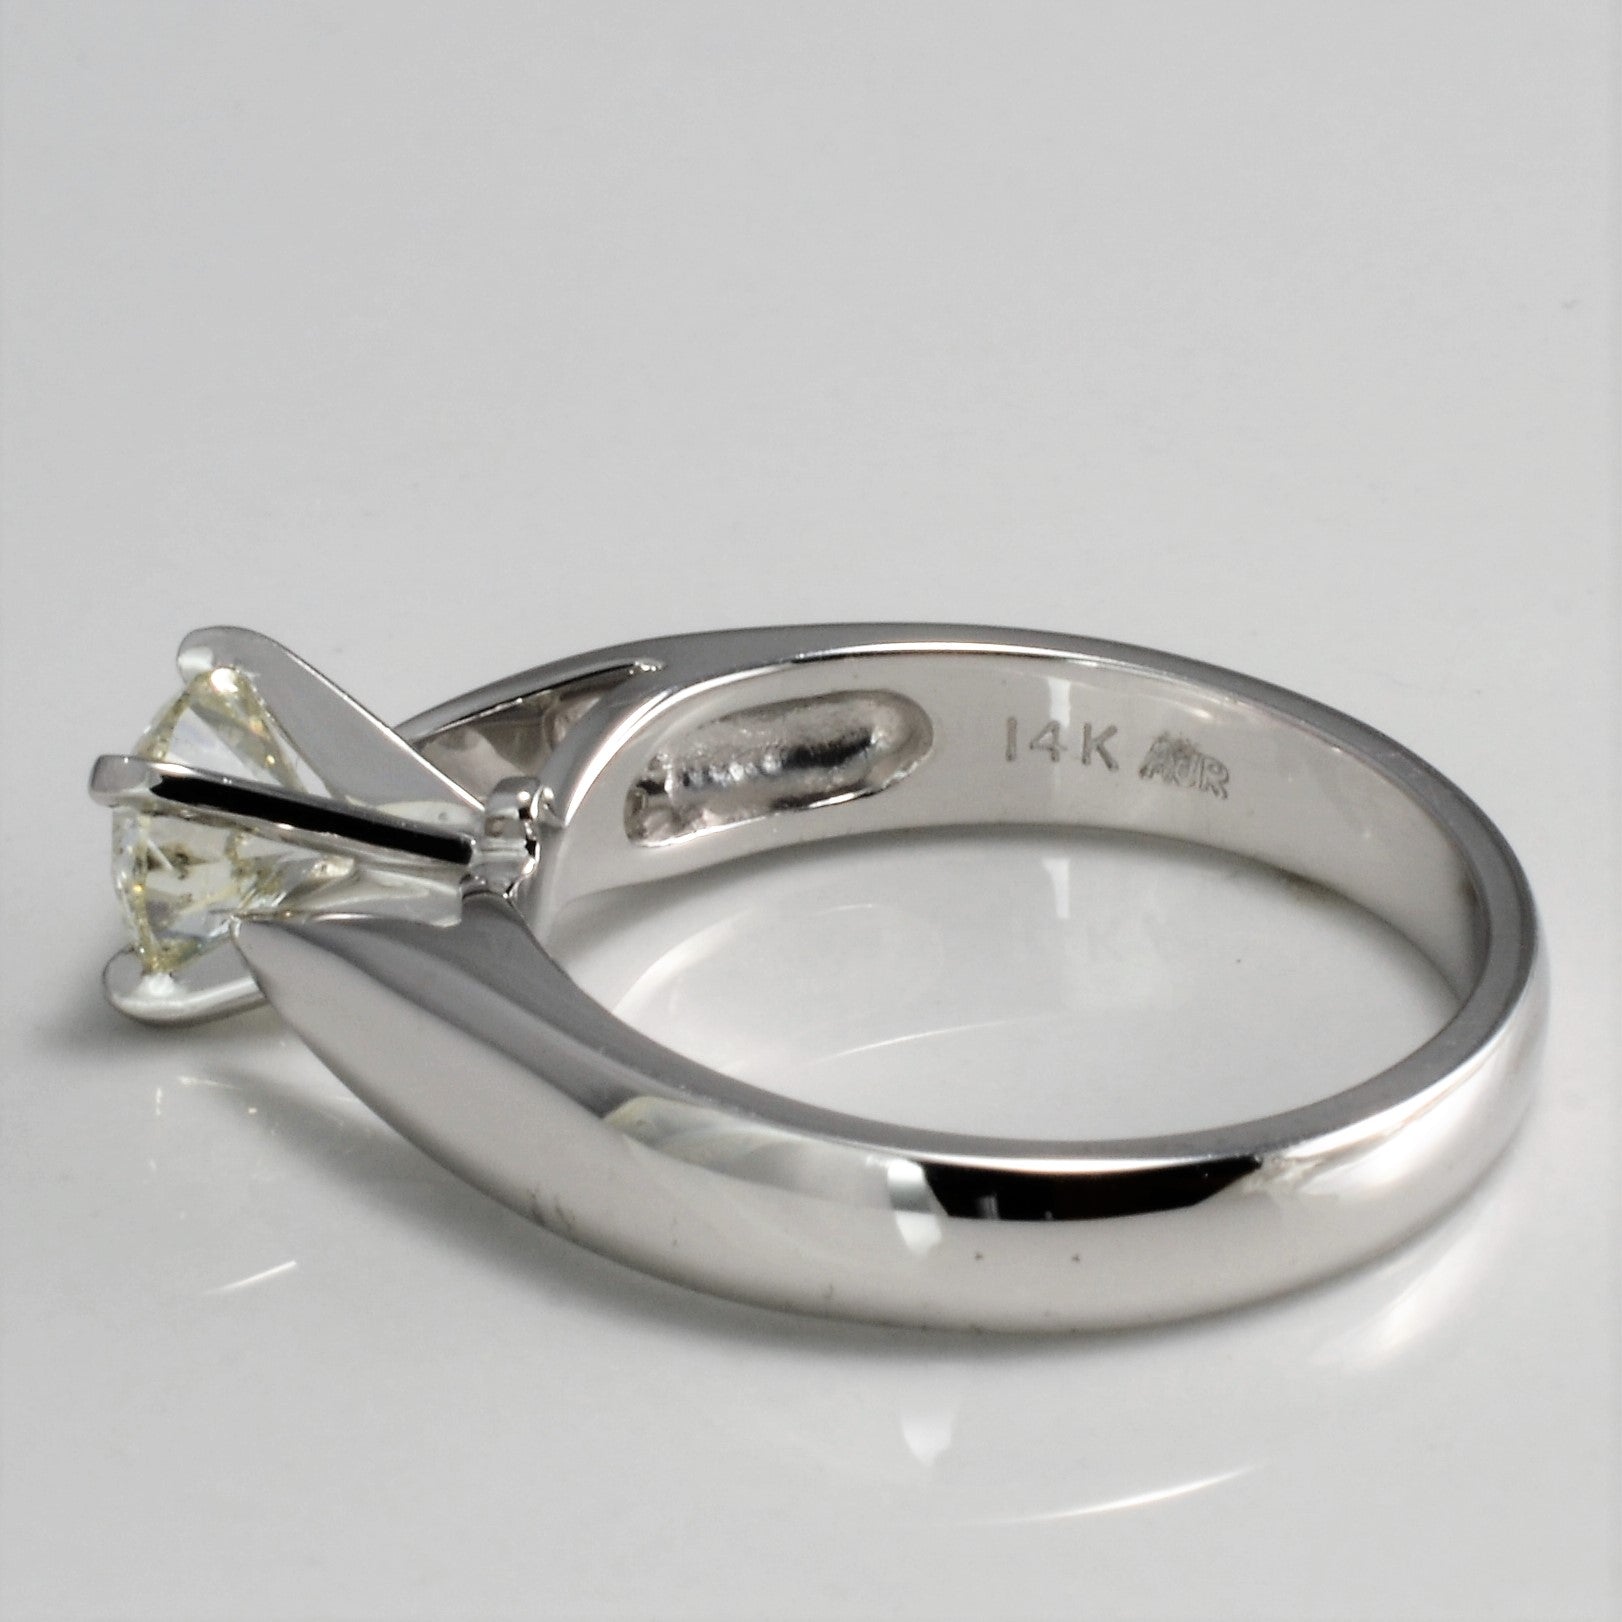 Tapered Solitaire Diamond Ring | 0.77 ct, SZ 6.25 |